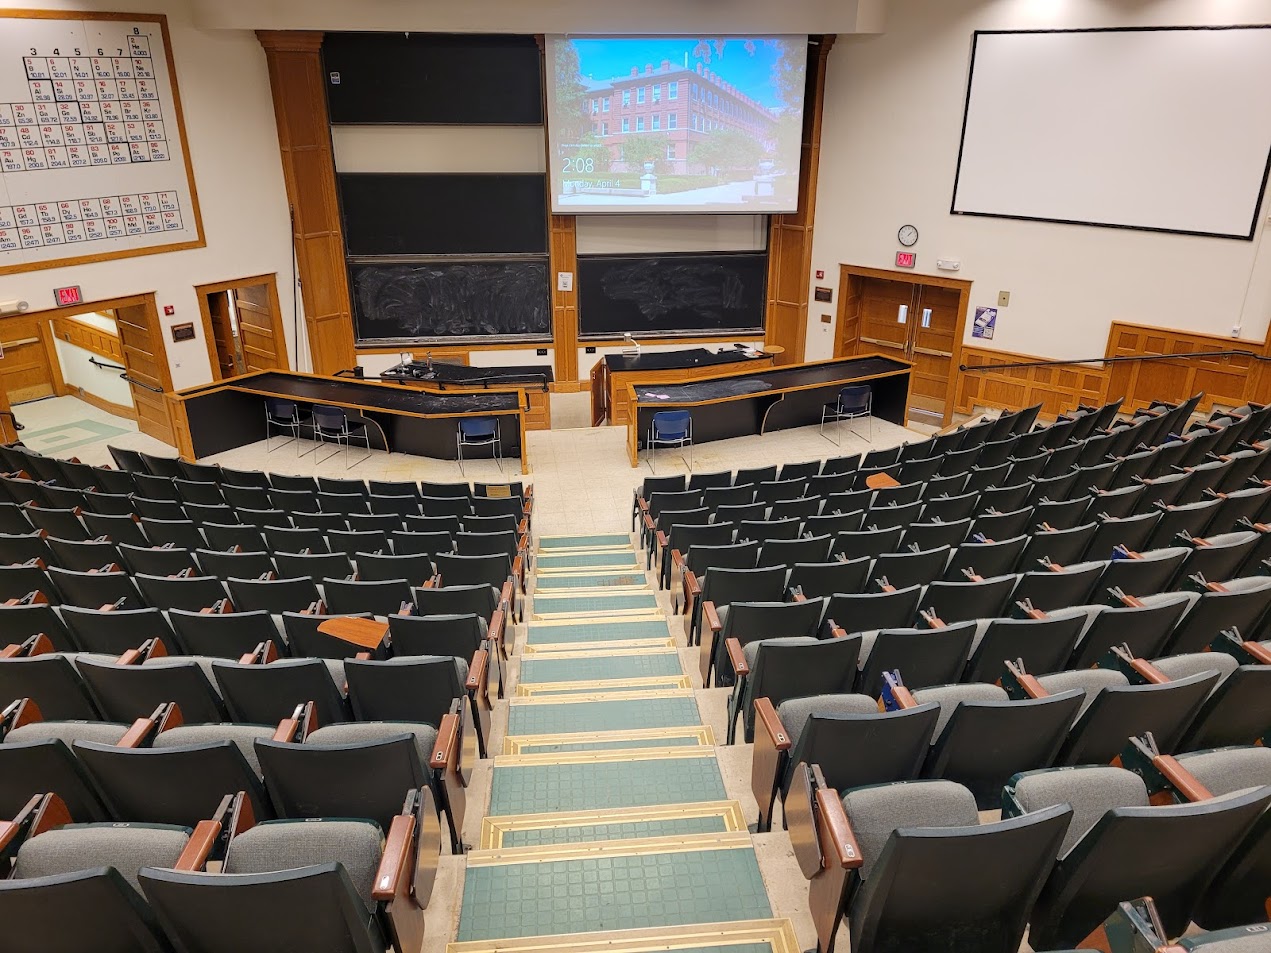 A view of the classroom with theater auditorium seating, chalkboards, and instructor laboratory table in front.